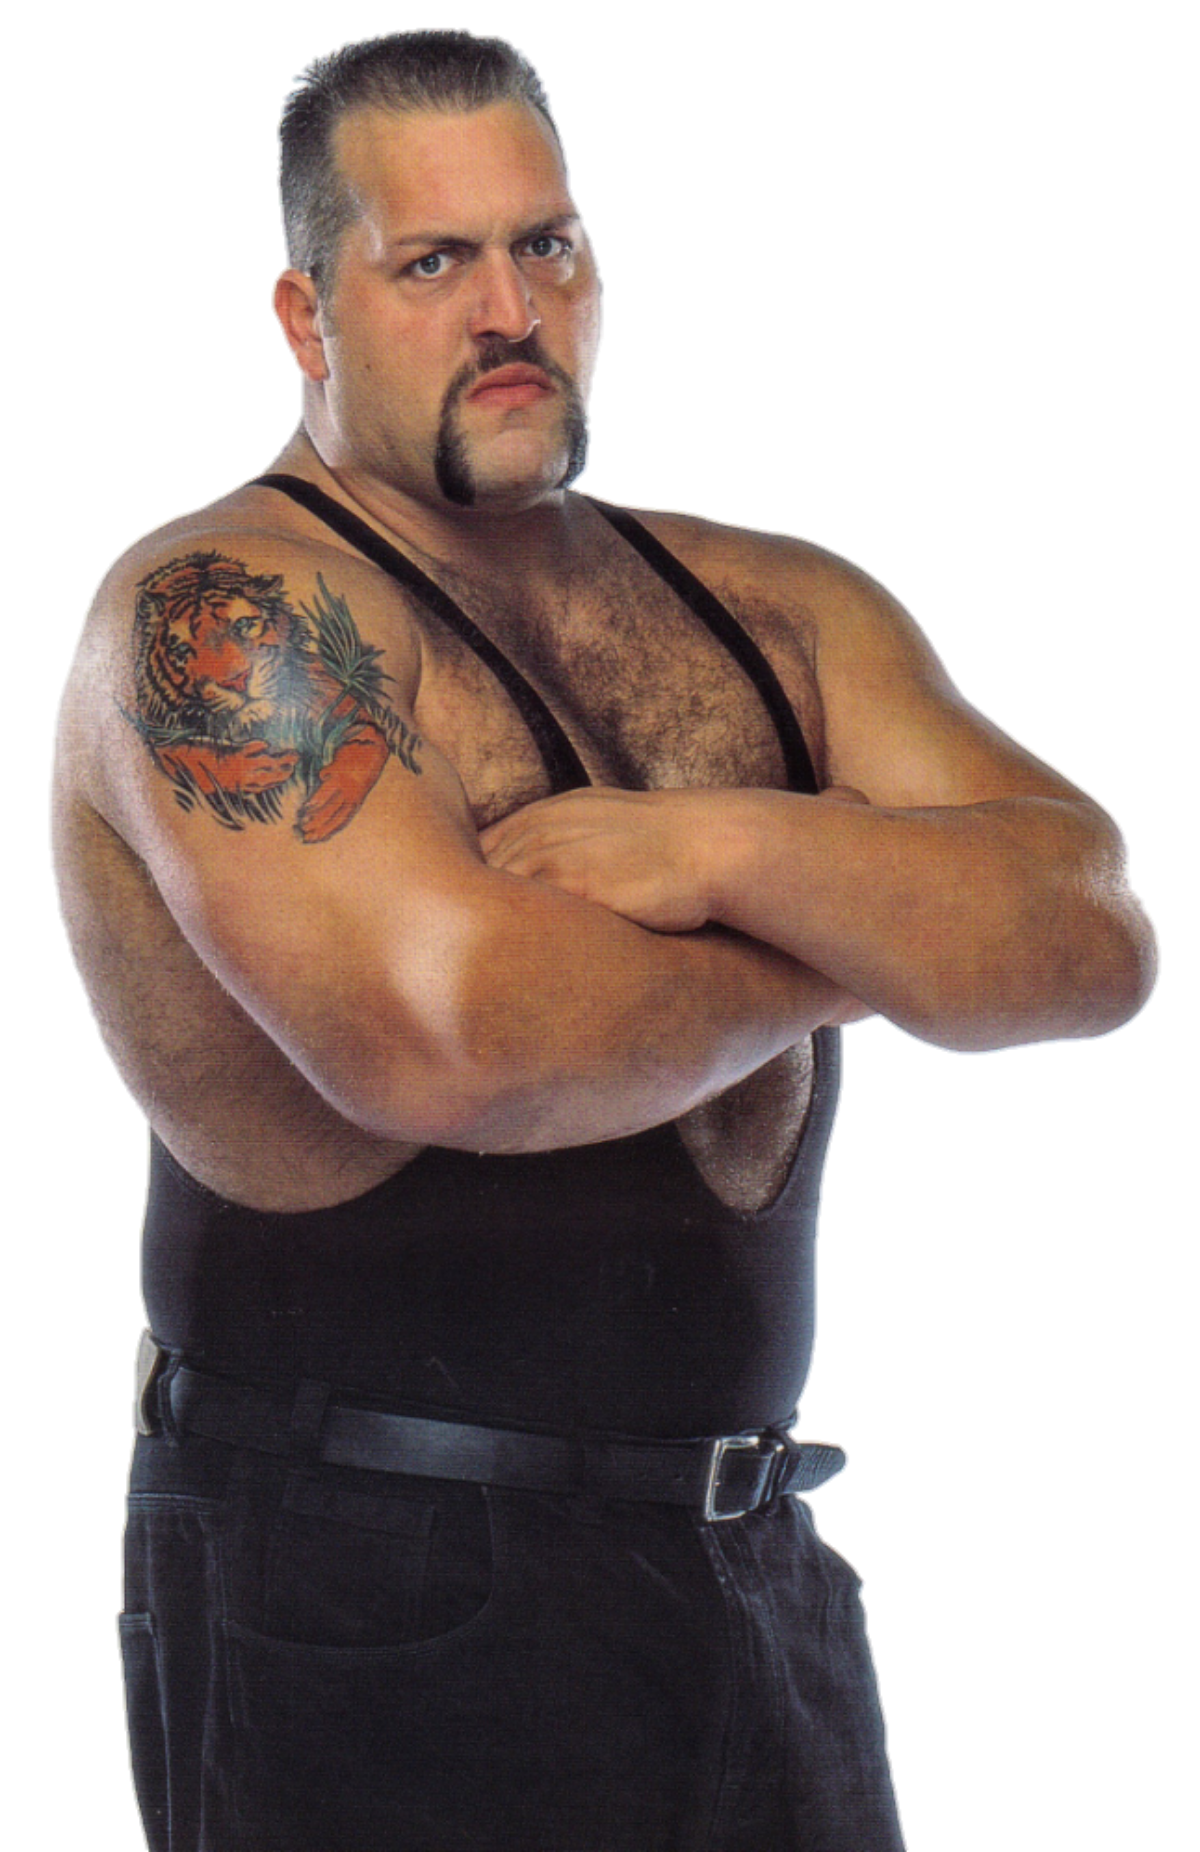 Big Show WWE Image Abyss